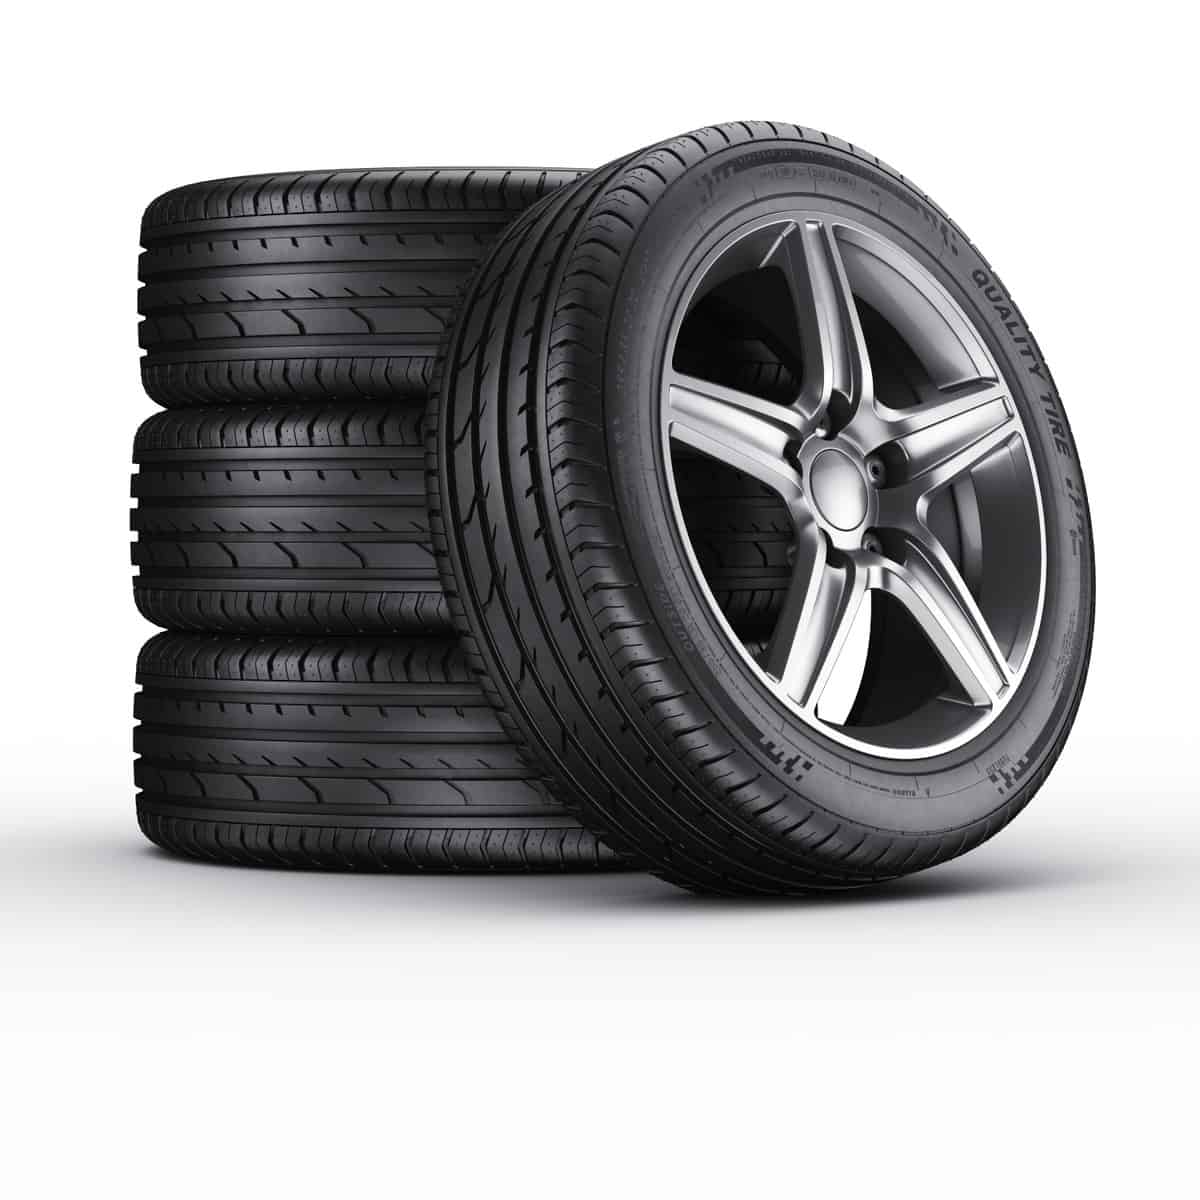 four car tires stacked against a white background